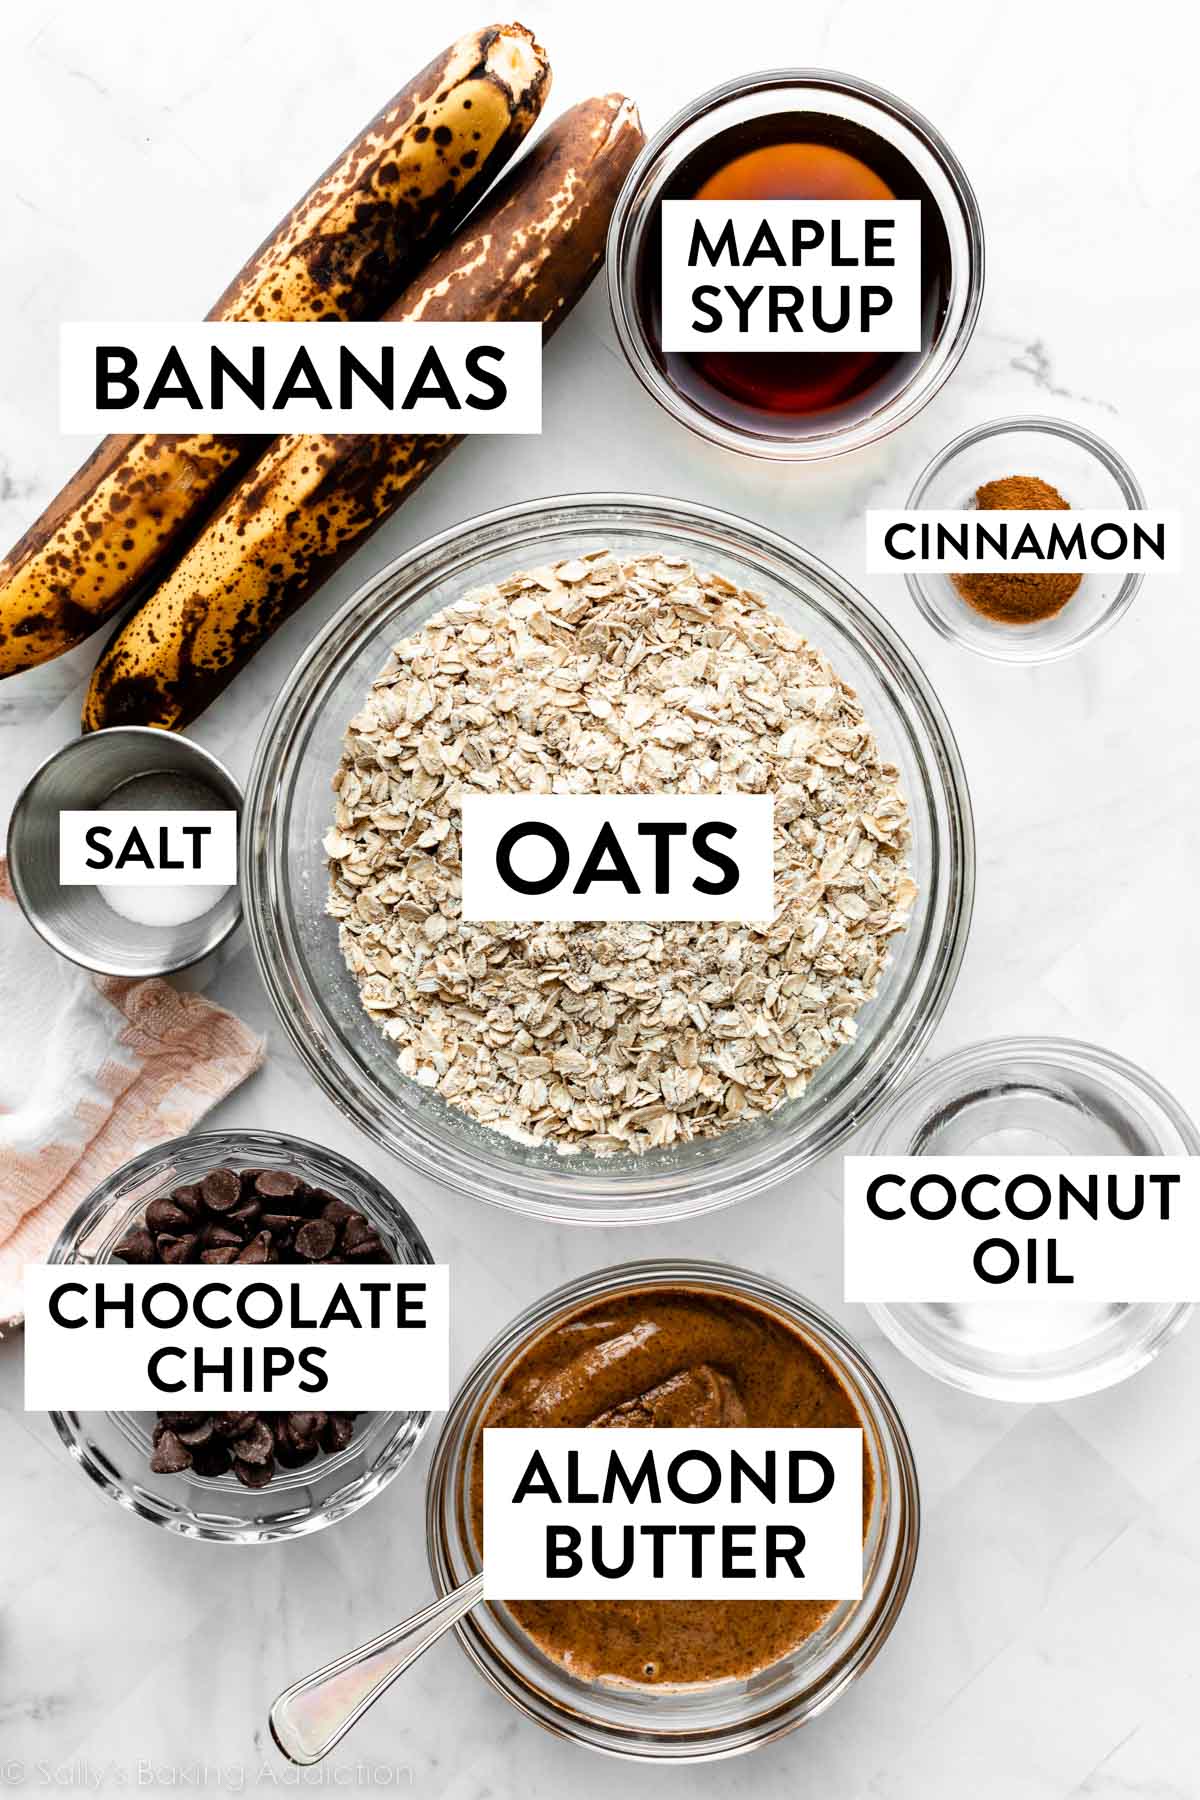 ingredients measured on counter including maple syrup, cinnamon, coconut oil, almond butter, 2 bananas, chocolate chips, and oats.